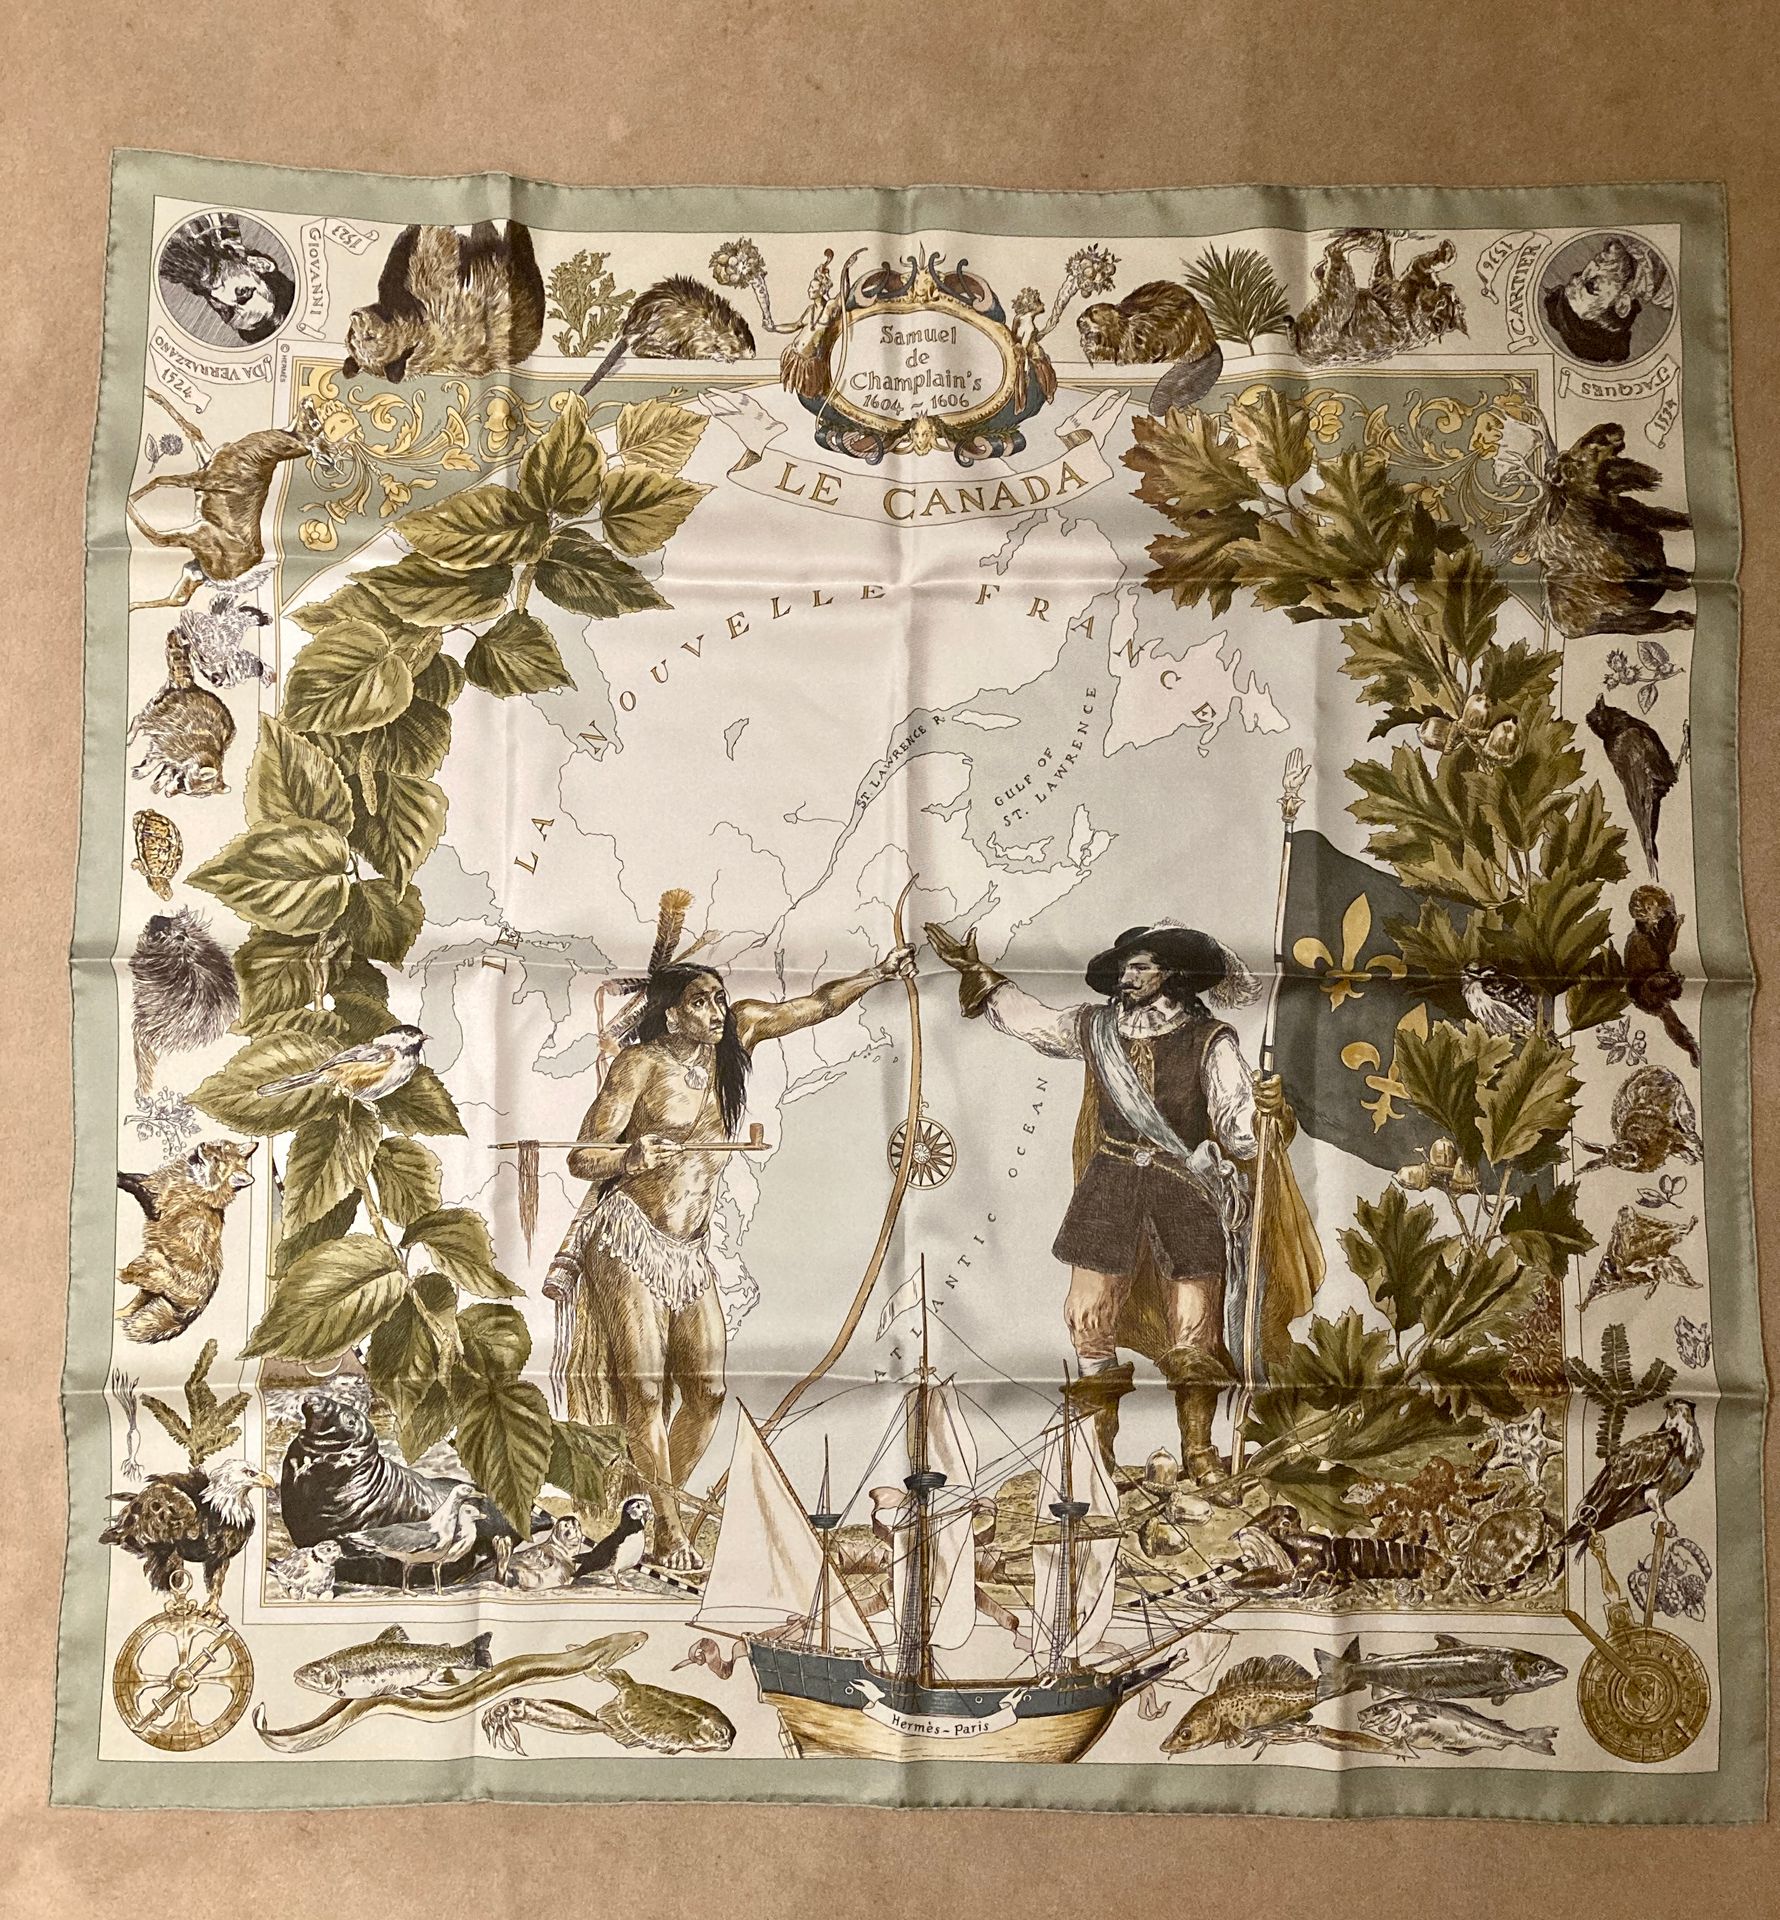 Null HERMES PARIS
Silk scarf titled "Le Canada". Box
Good condition